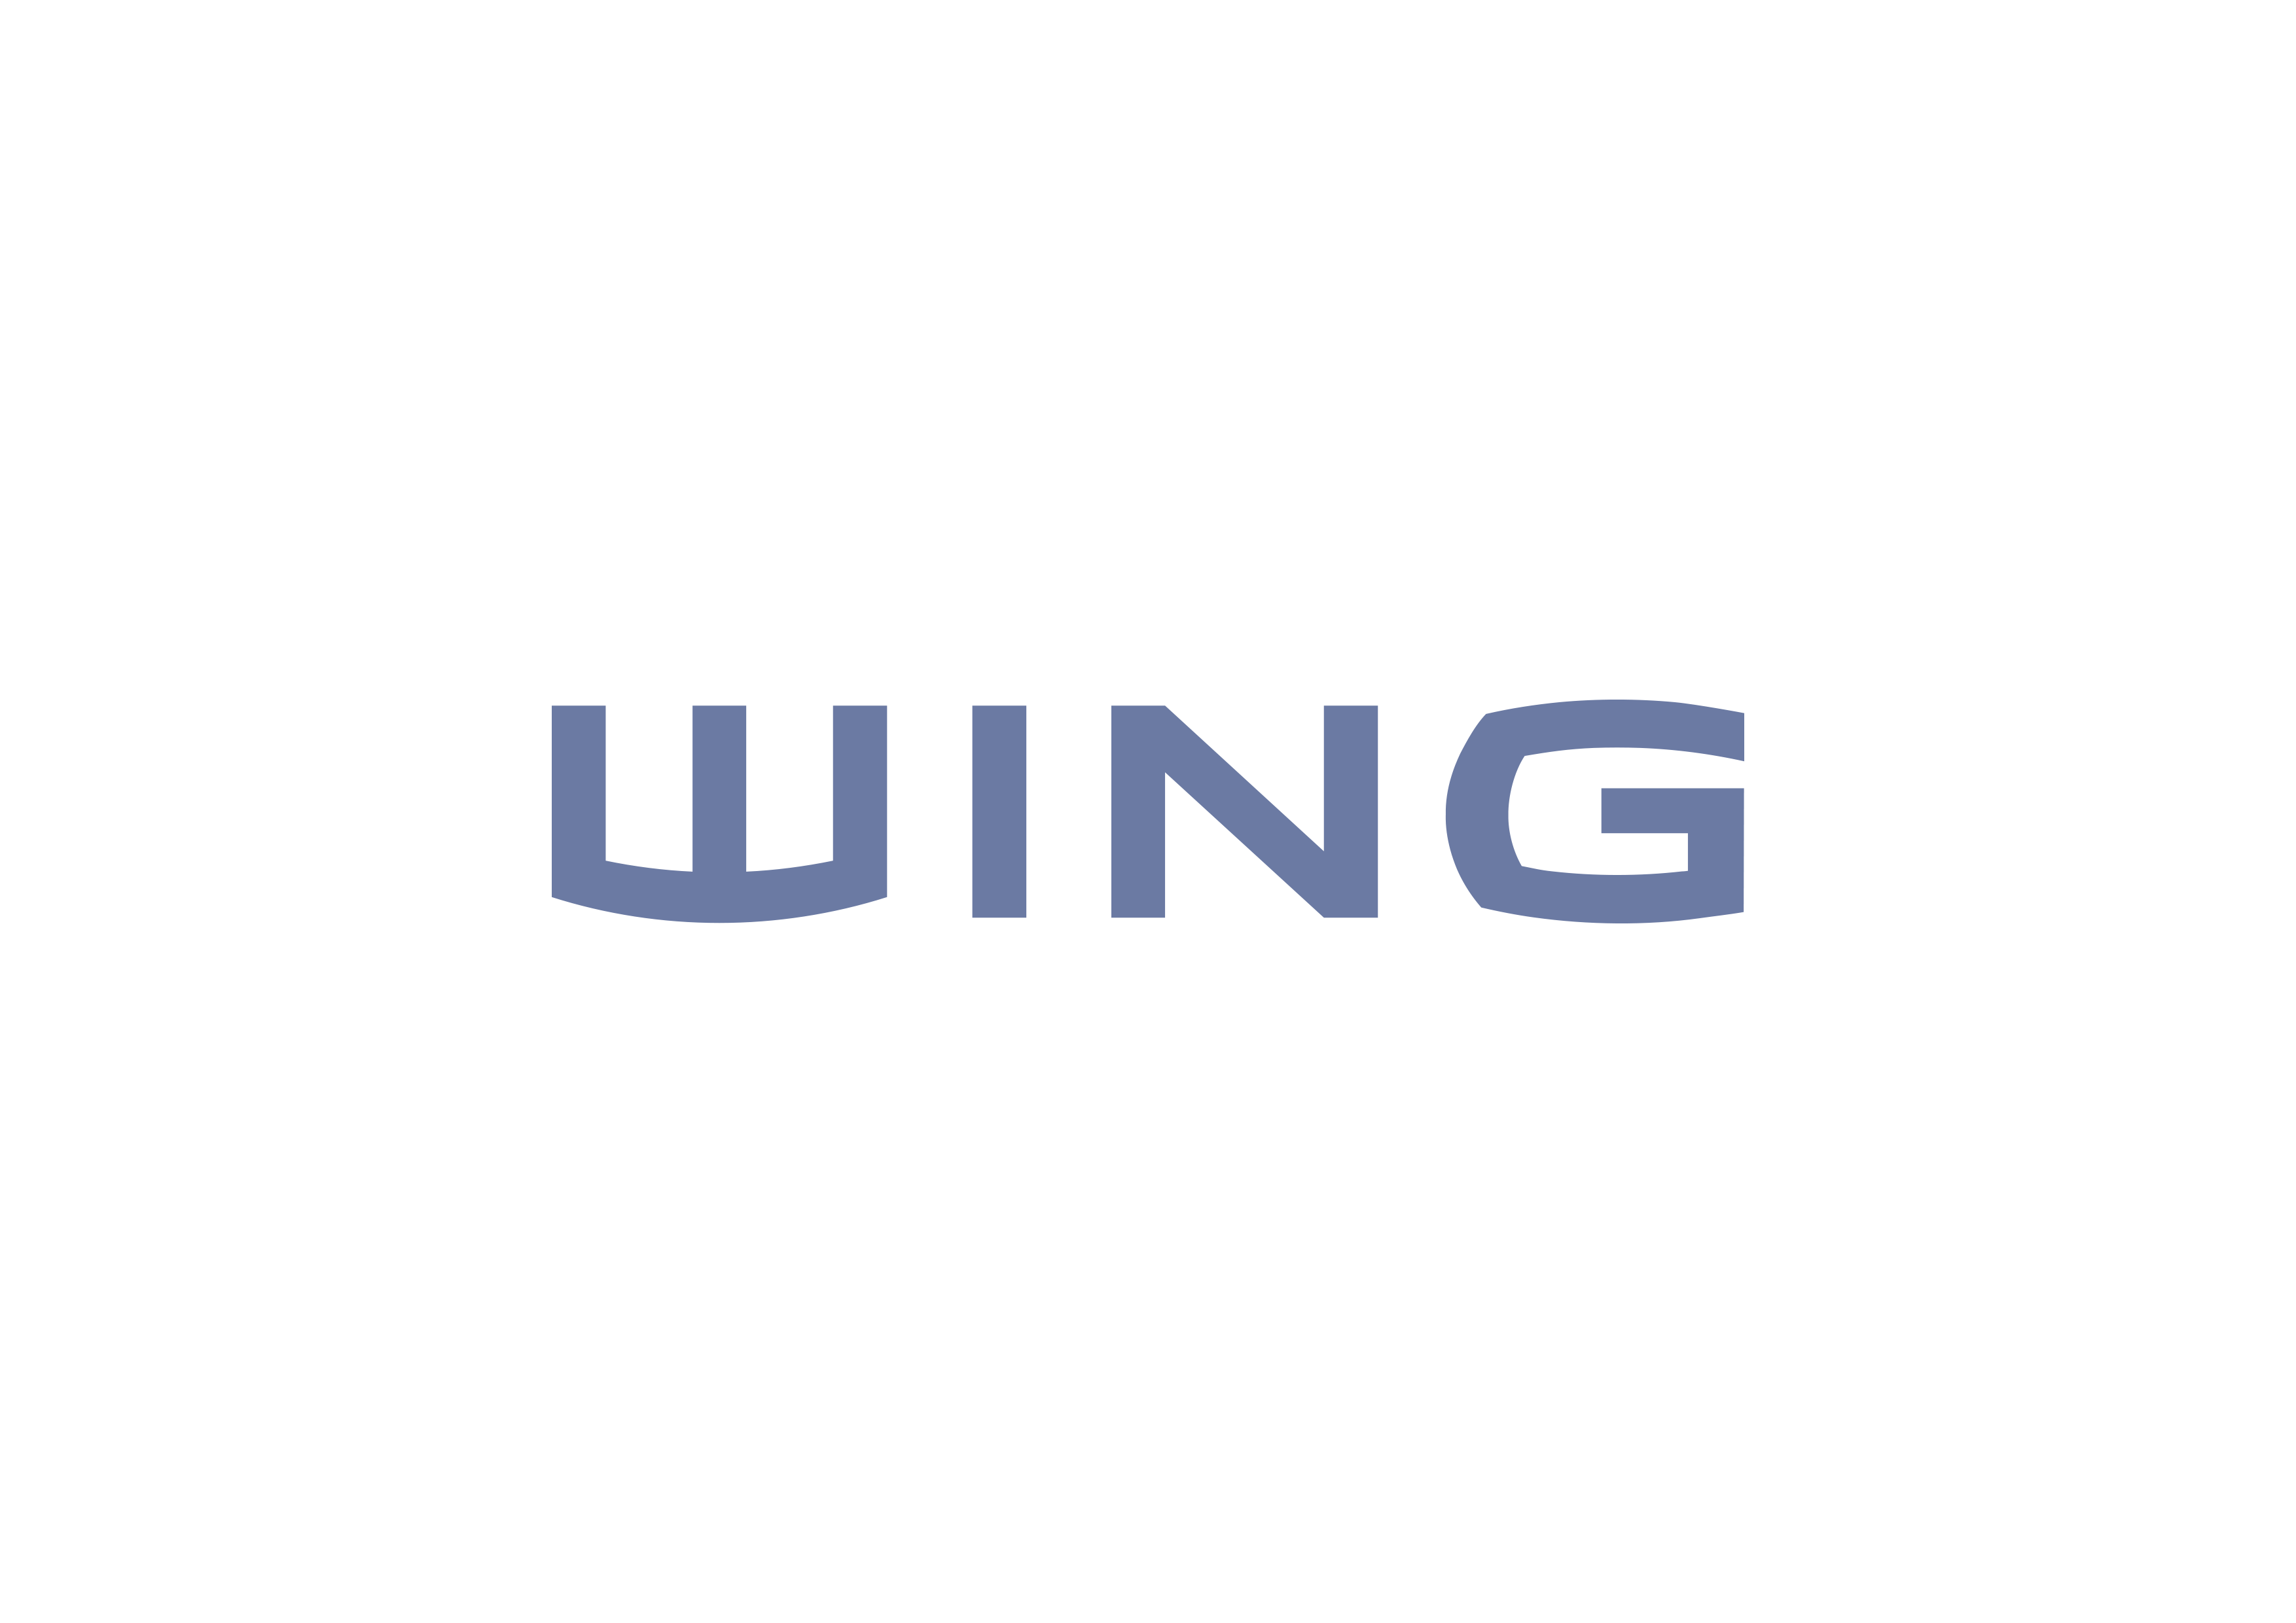 WING is now a major player on the Polish market